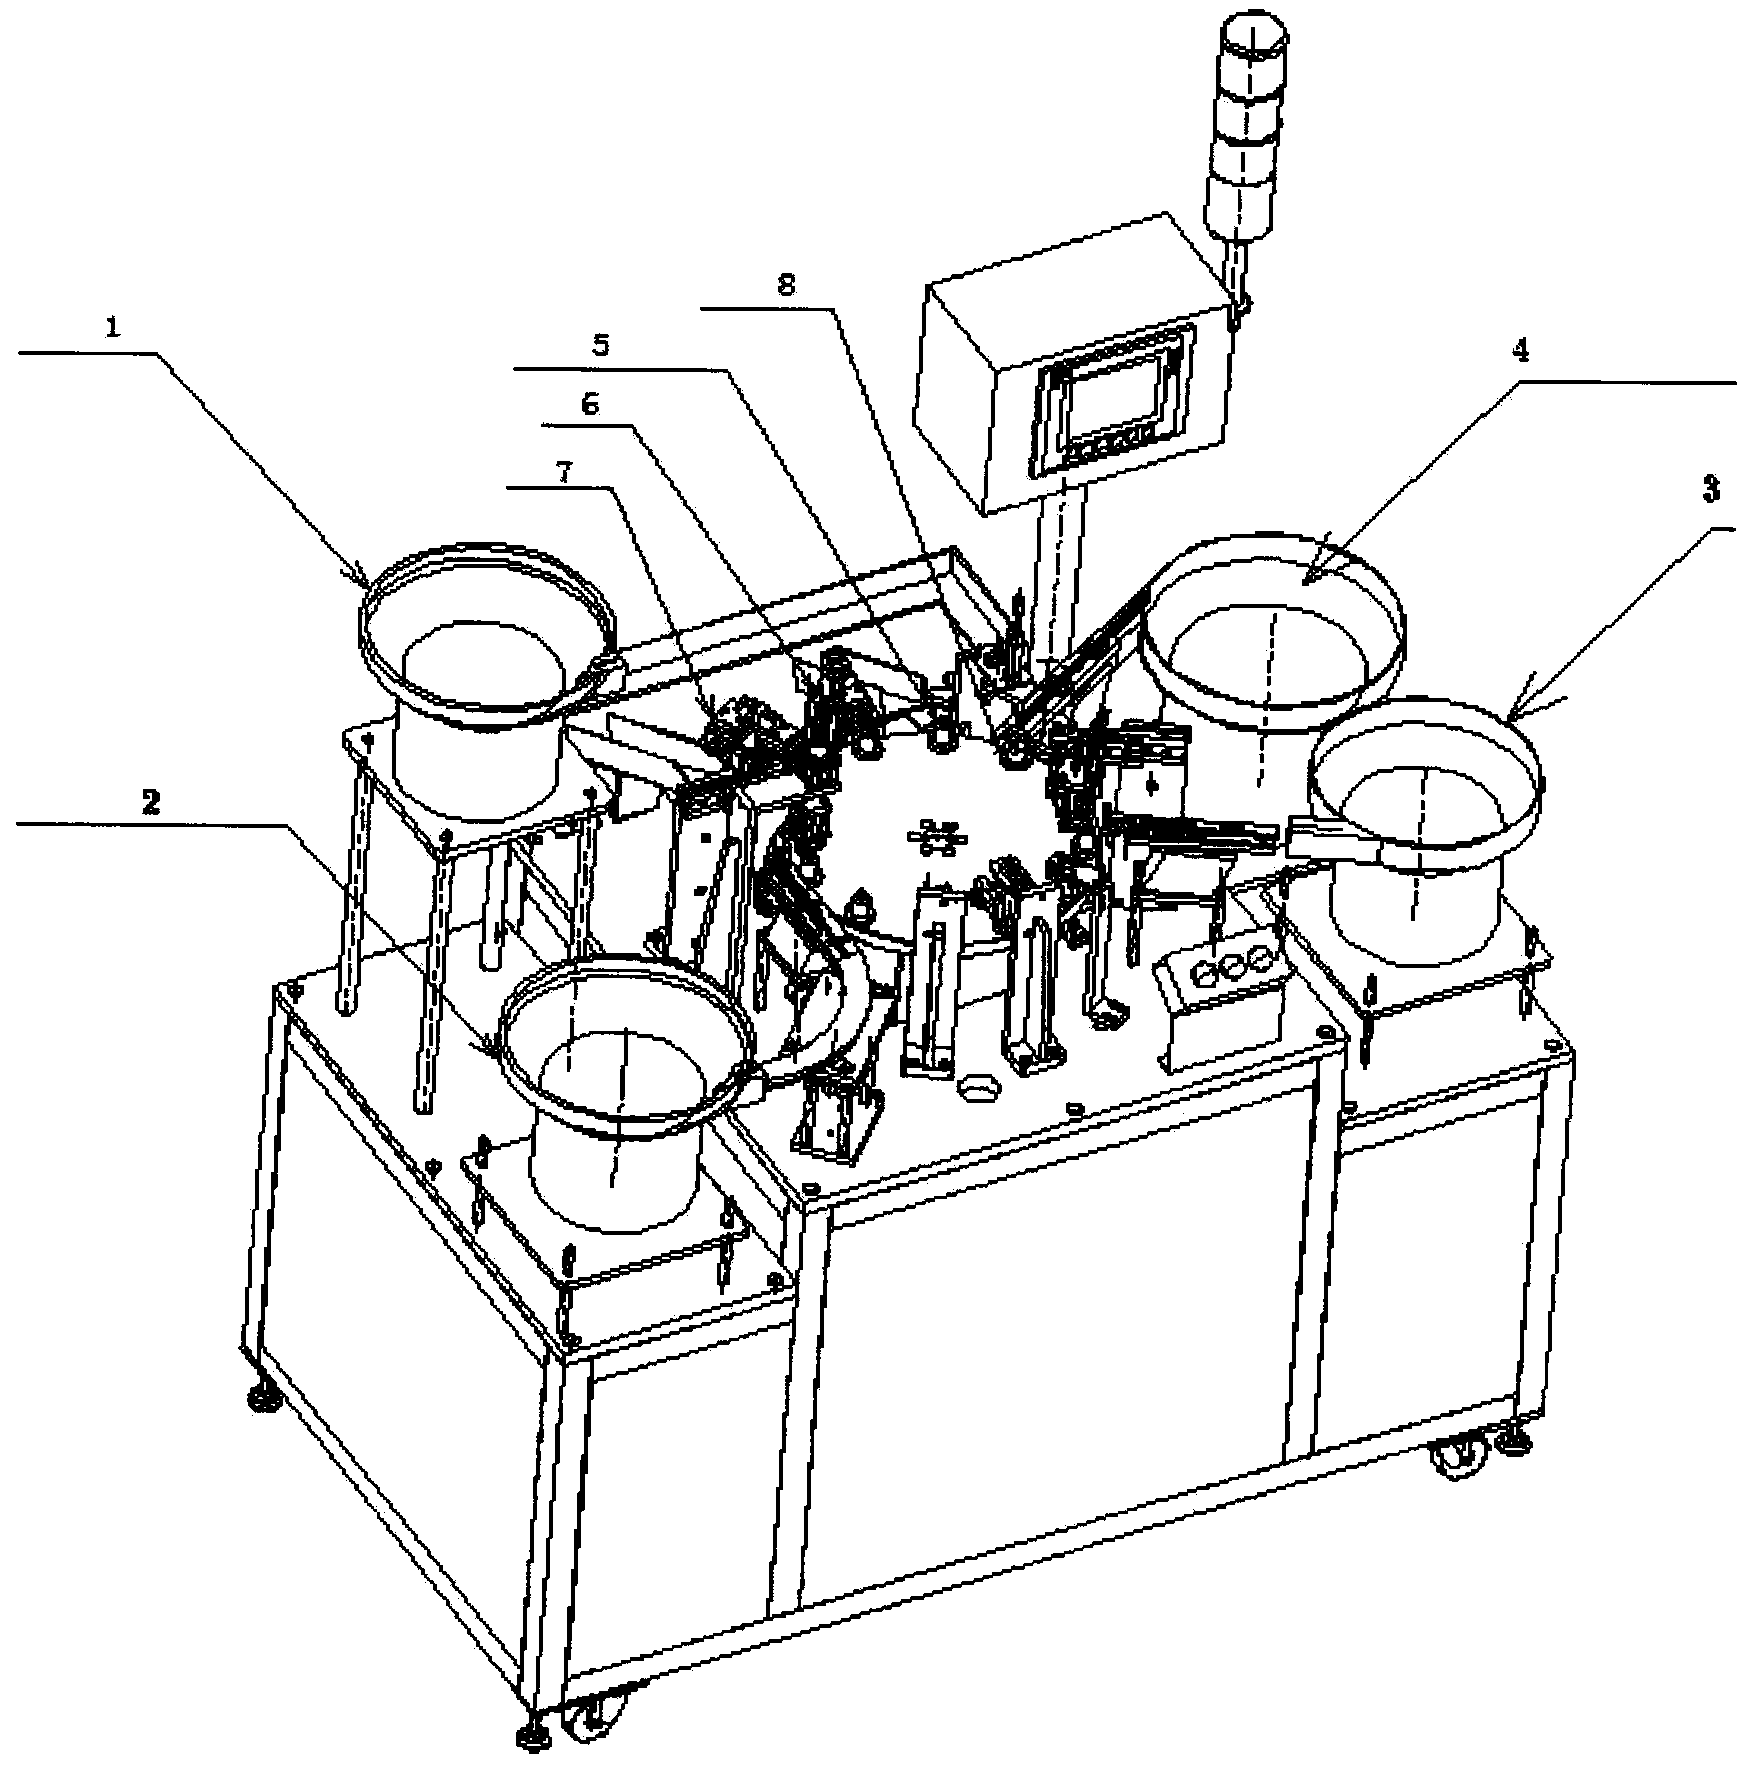 Full-automatic SC joint assembly machine